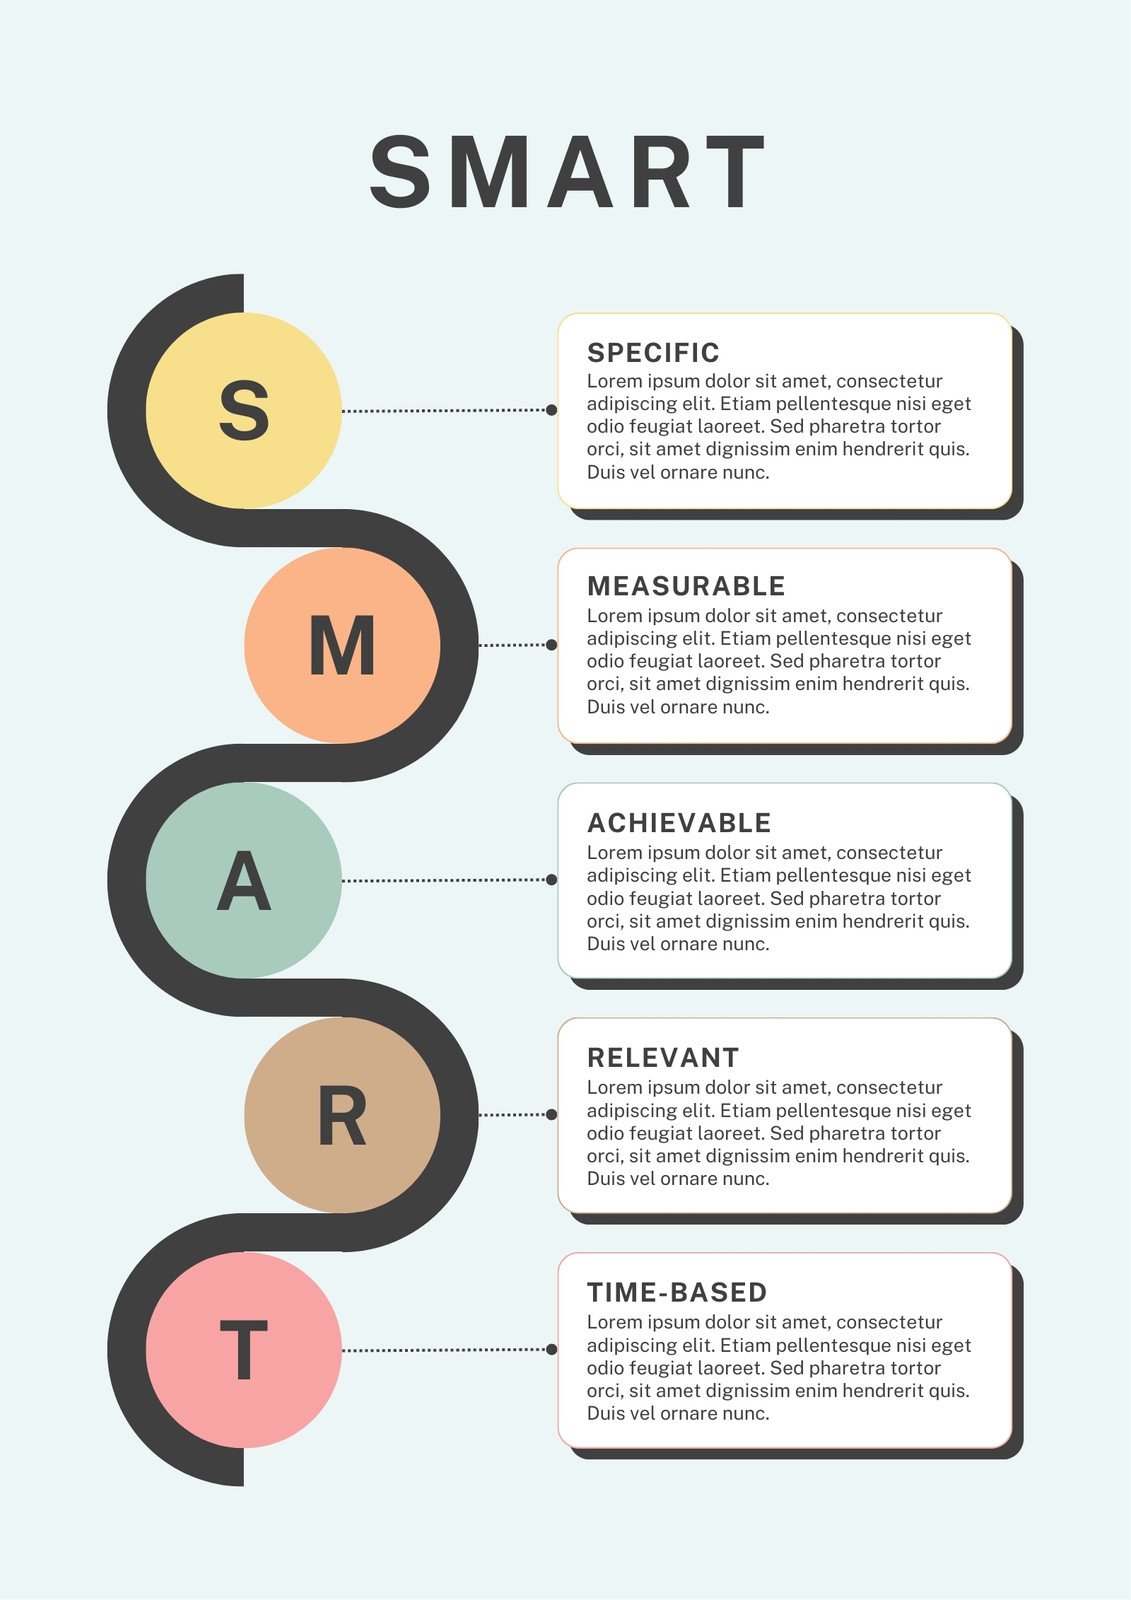 SMART Goals Business Infographic Poster